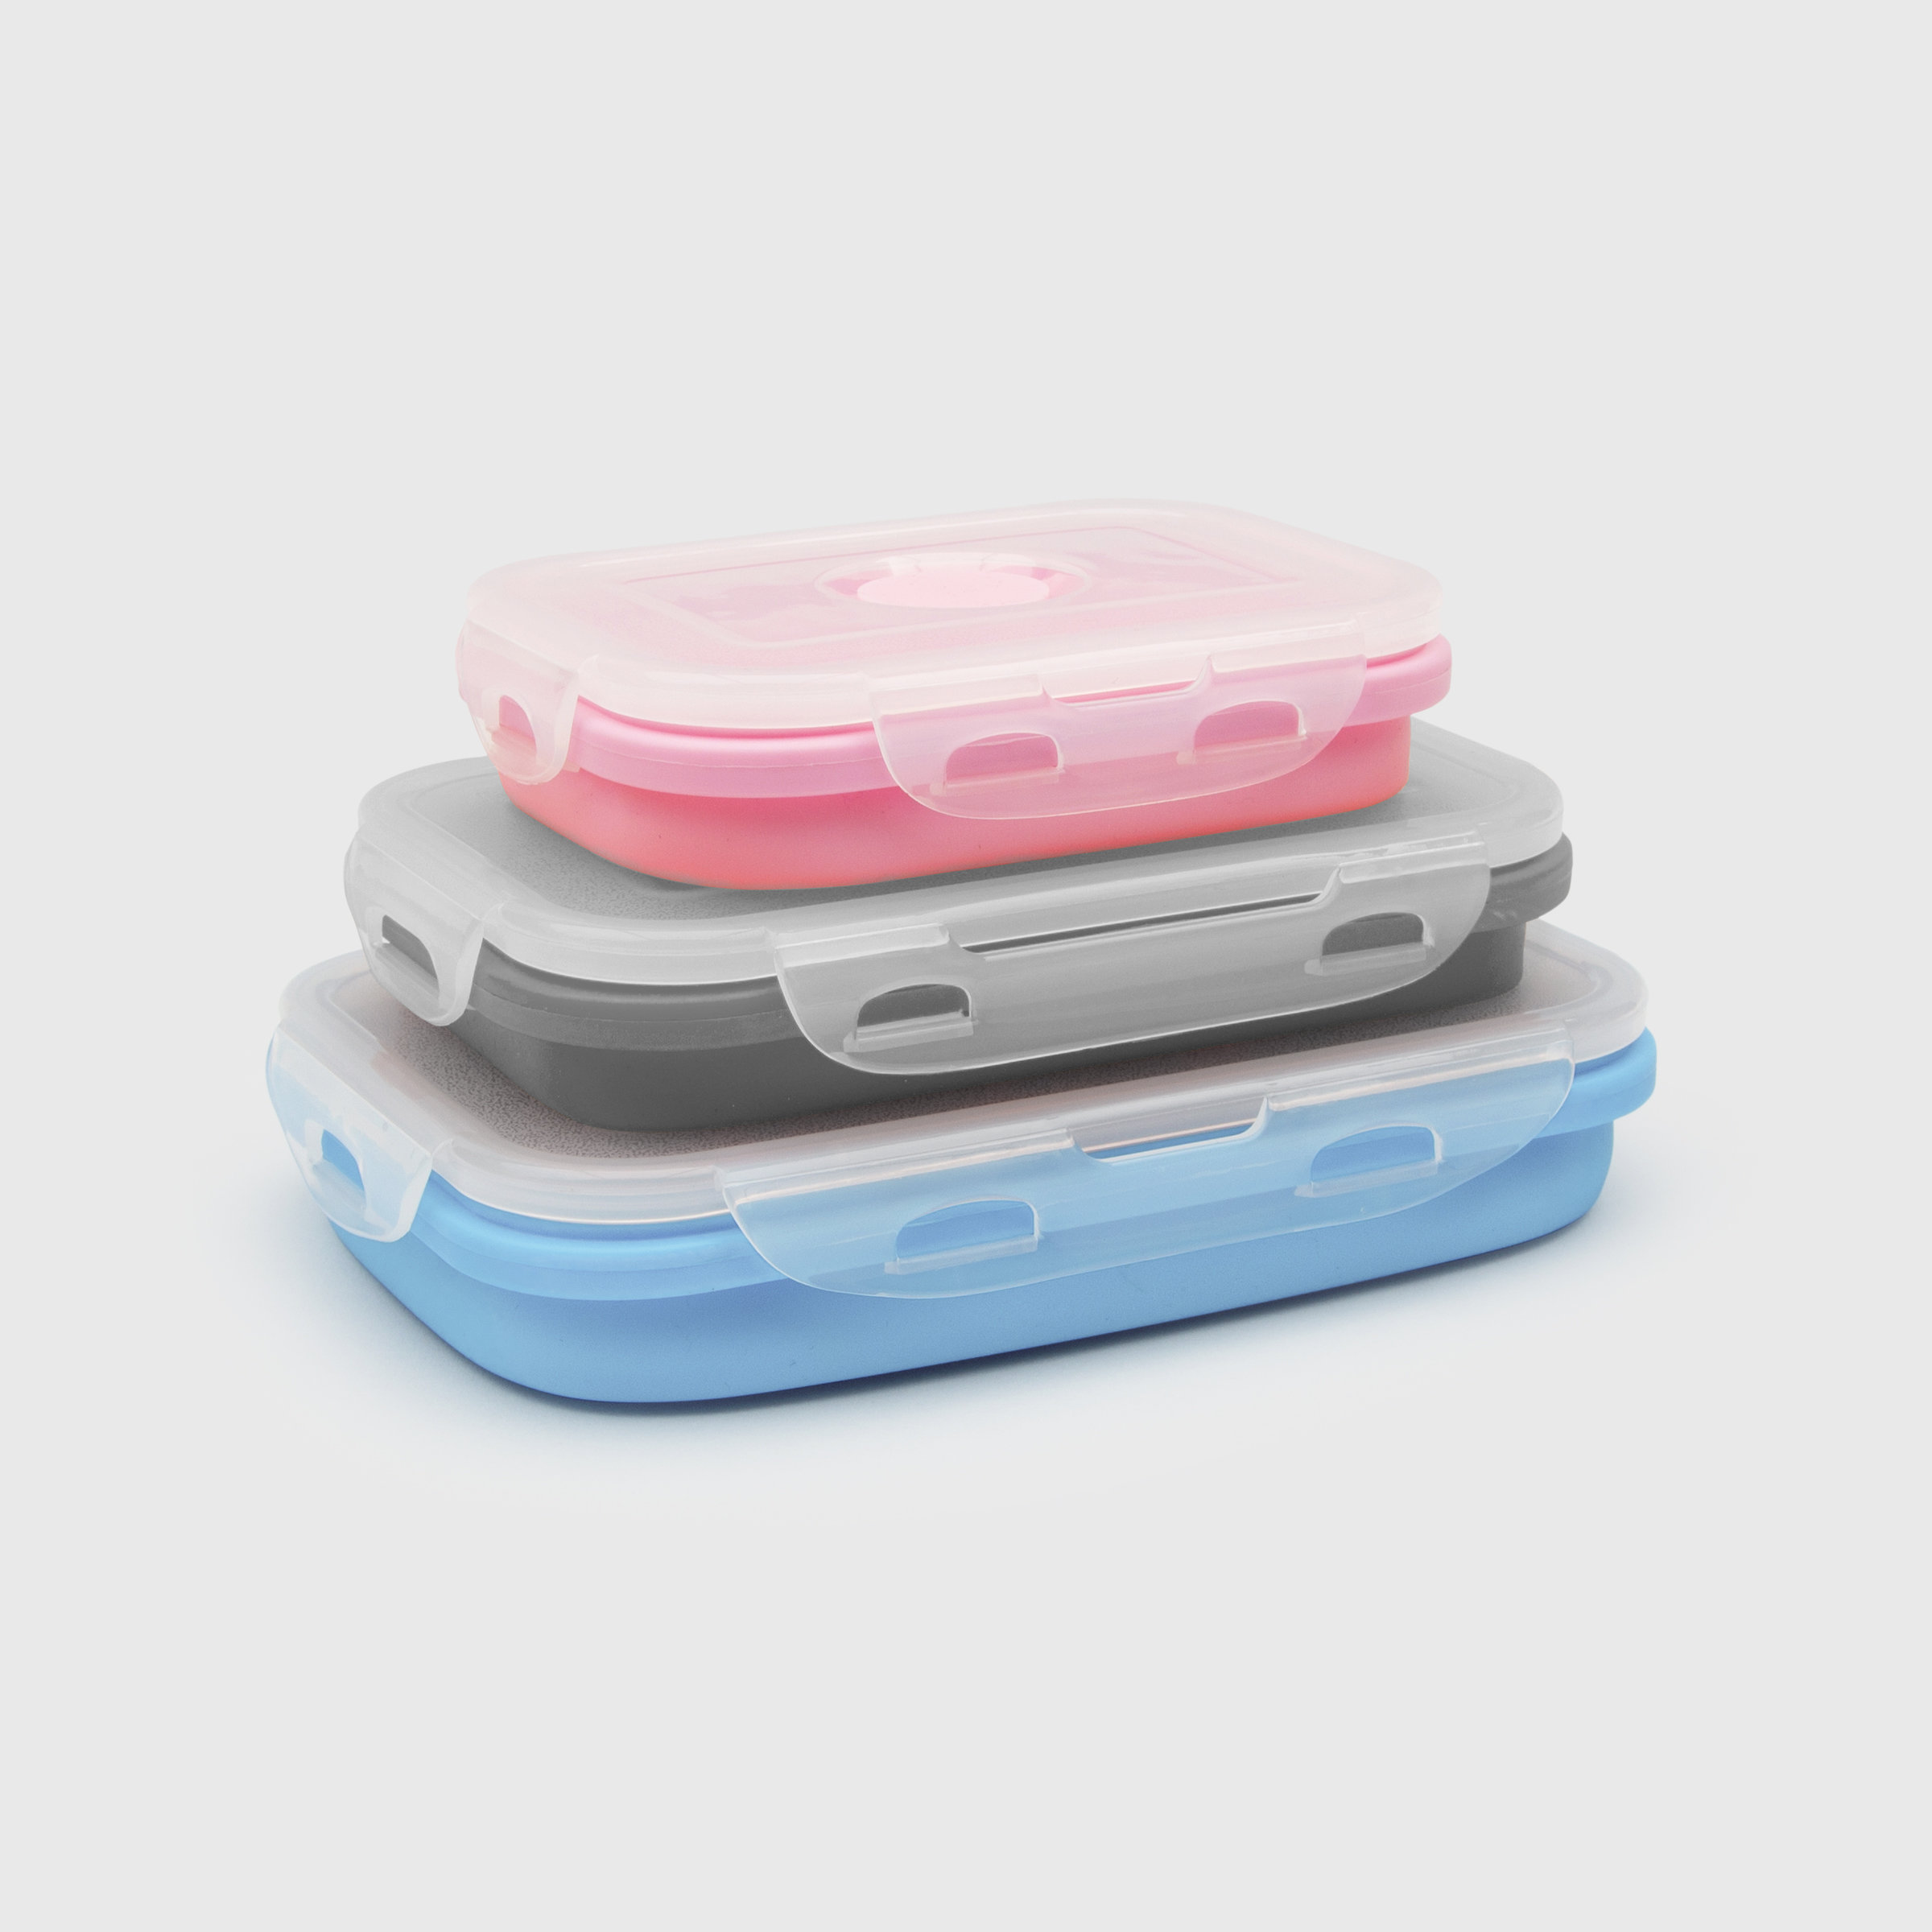 Collapsible lunchboxes in pink, grey and blue